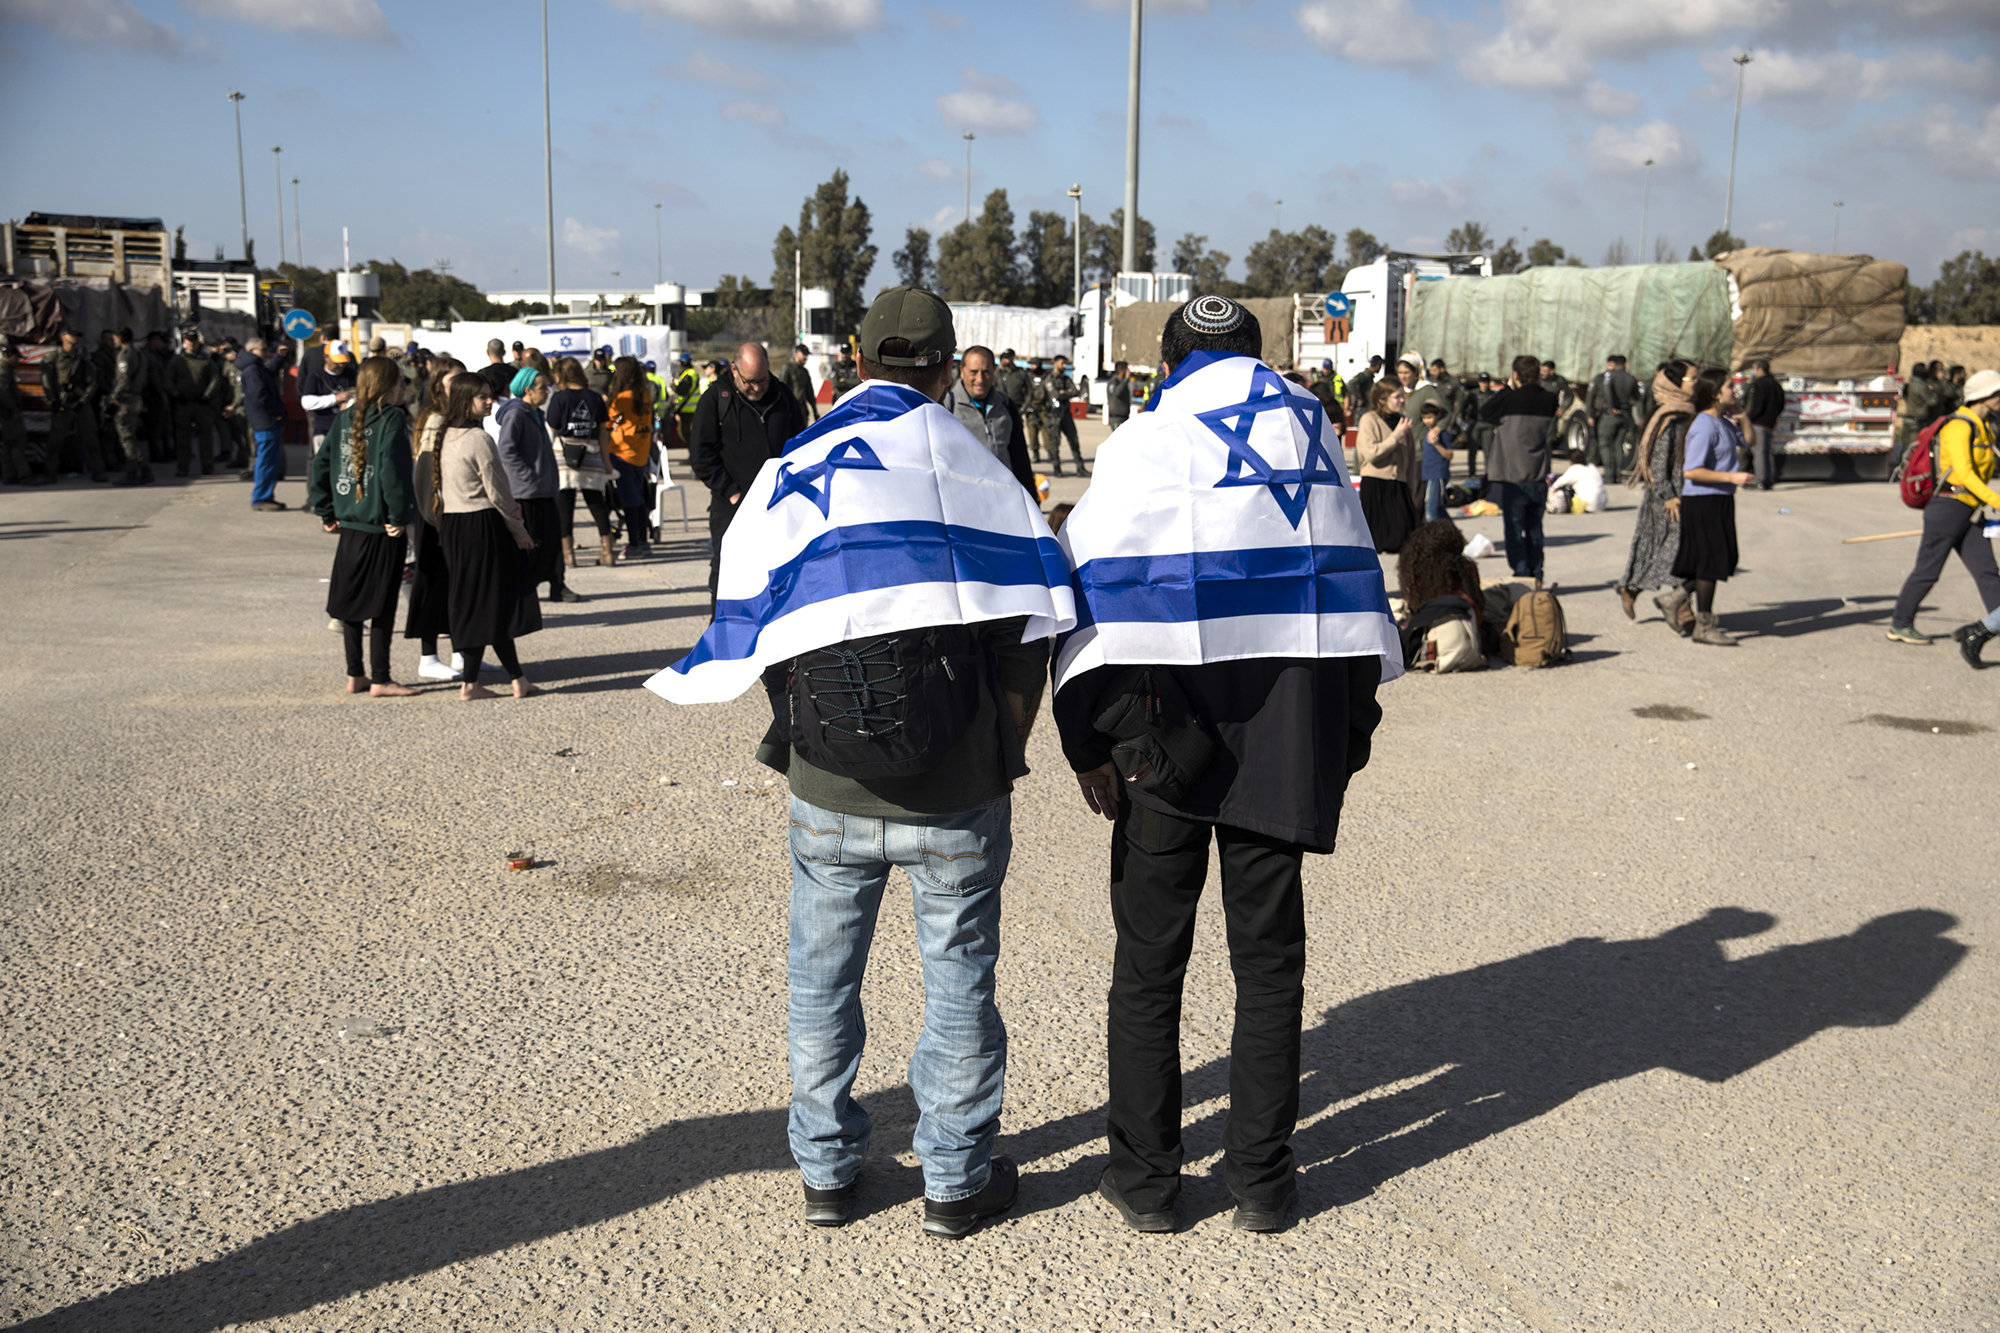 Protesters block humanitarian aid due to enter Gaza on February 6, in Kerem Shalom, Israel.